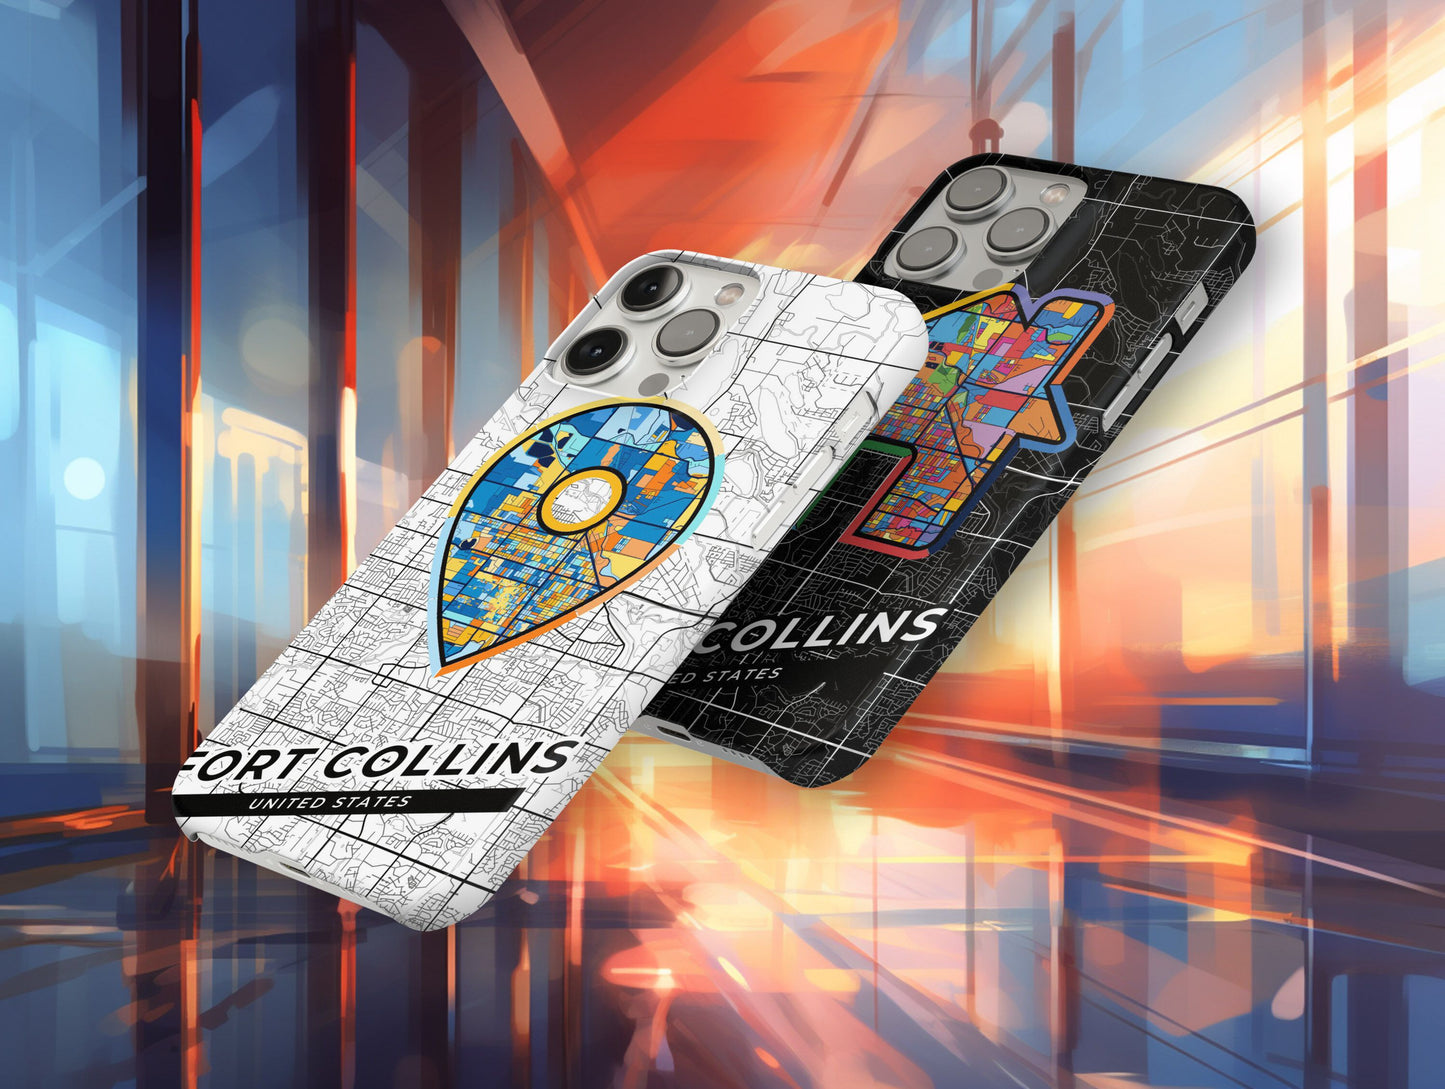 Fort Collins Colorado slim phone case with colorful icon. Birthday, wedding or housewarming gift. Couple match cases.